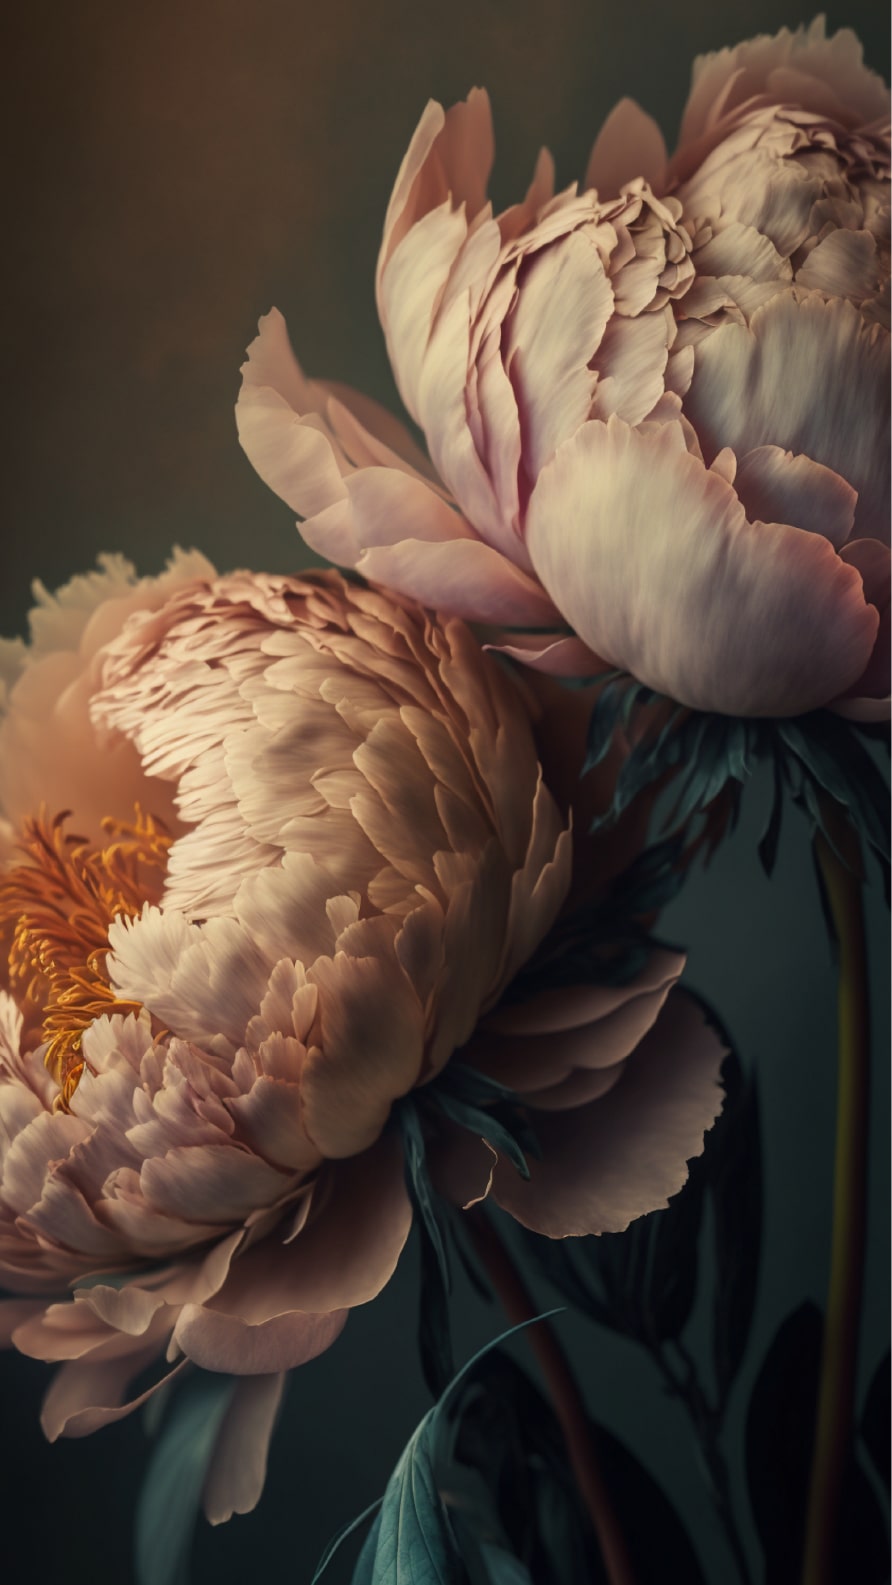 iPhone wallpapers featuring flowers